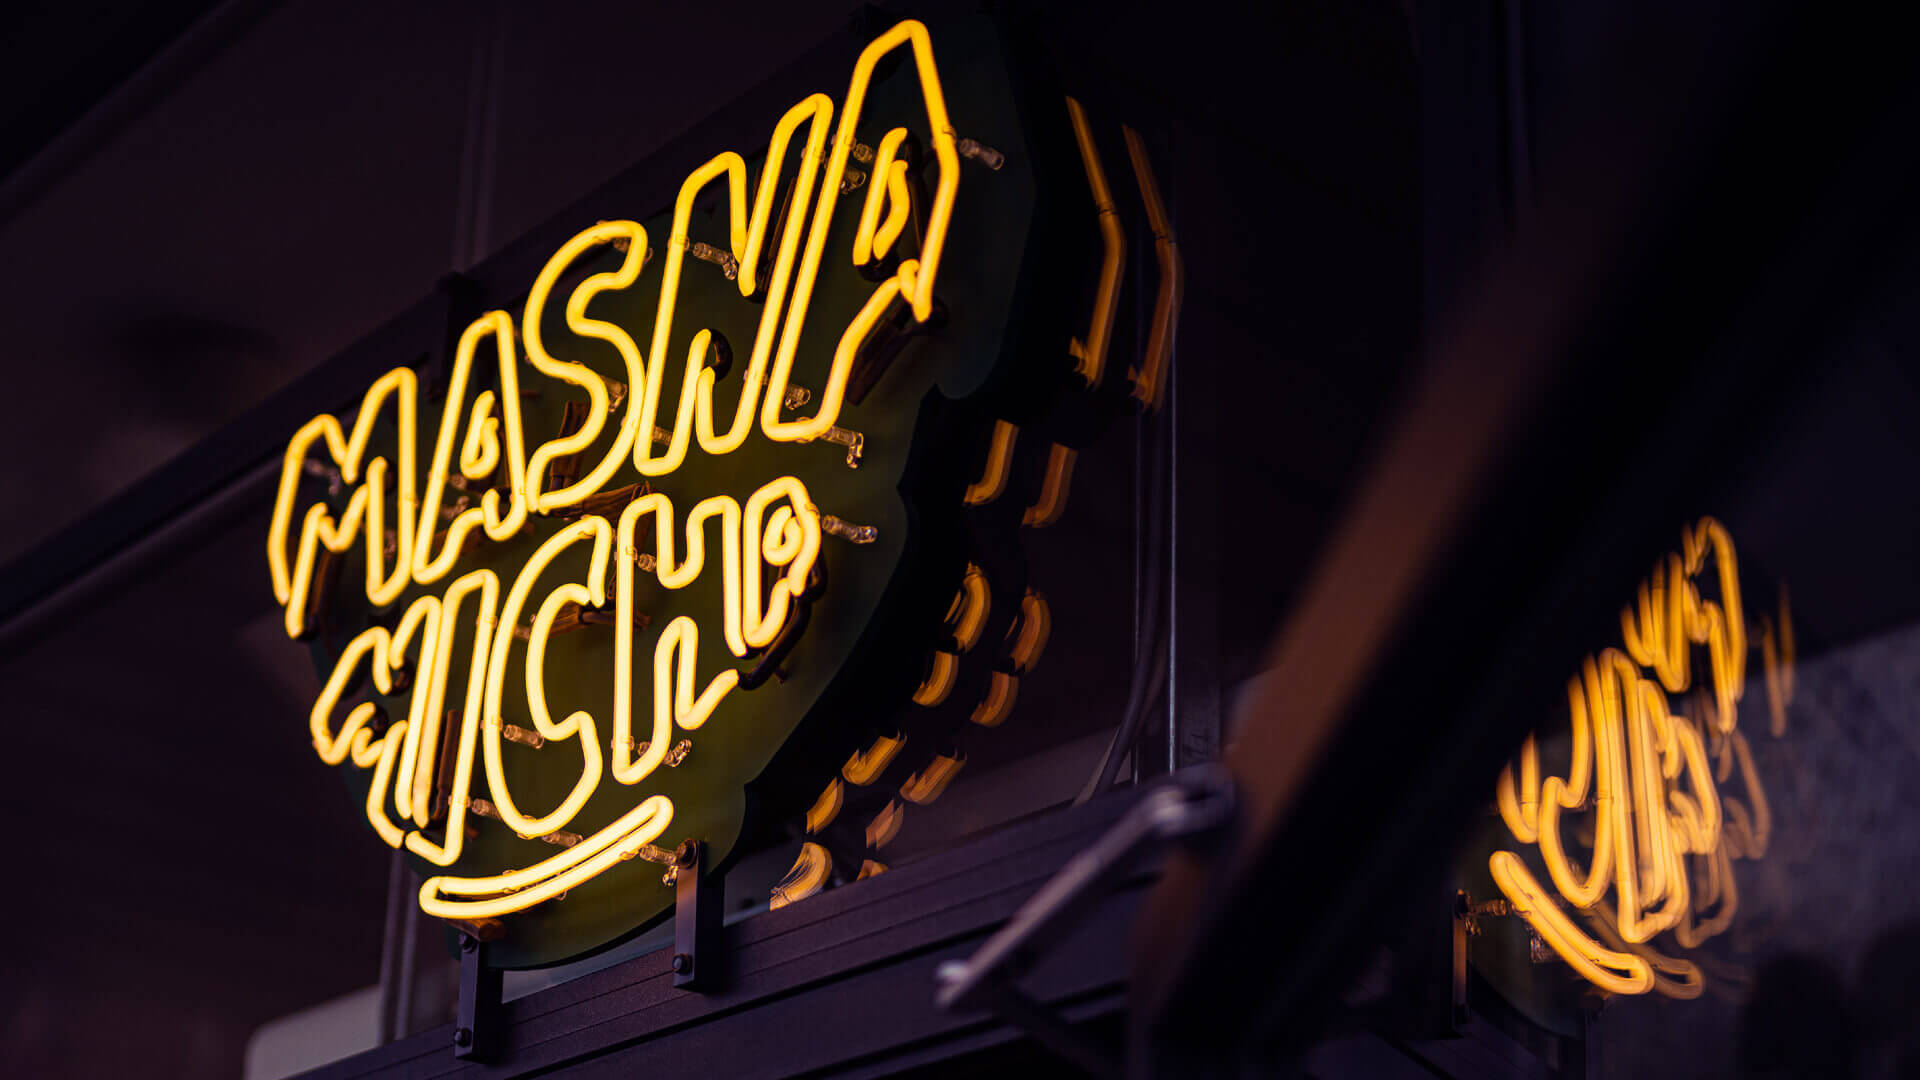 Masna Micha - Neon sign for Masna Micha restaurant in Gdansk, outside the premises.